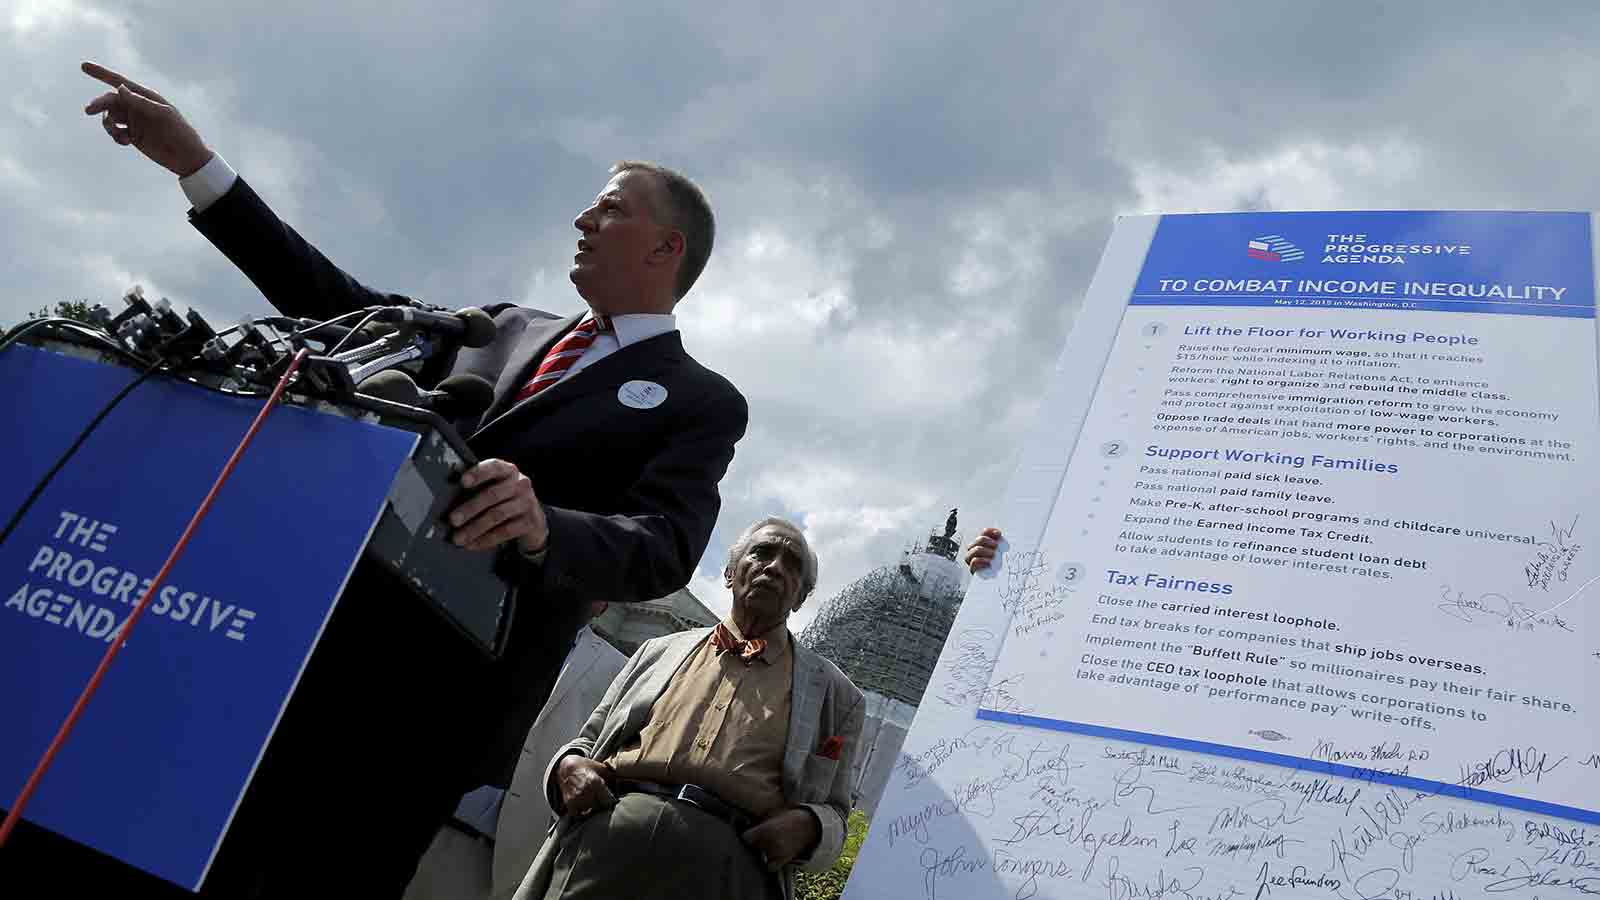 New York City Mayor Bill de Blasio (L) holds a news conference on his progressive agenda against income inequality with labor leaders and elected officials outside the U.S. Capitol in Washington May 12, 2015. Also pictured is U.S. Representative Charlie Rangel (D-NY) (C).